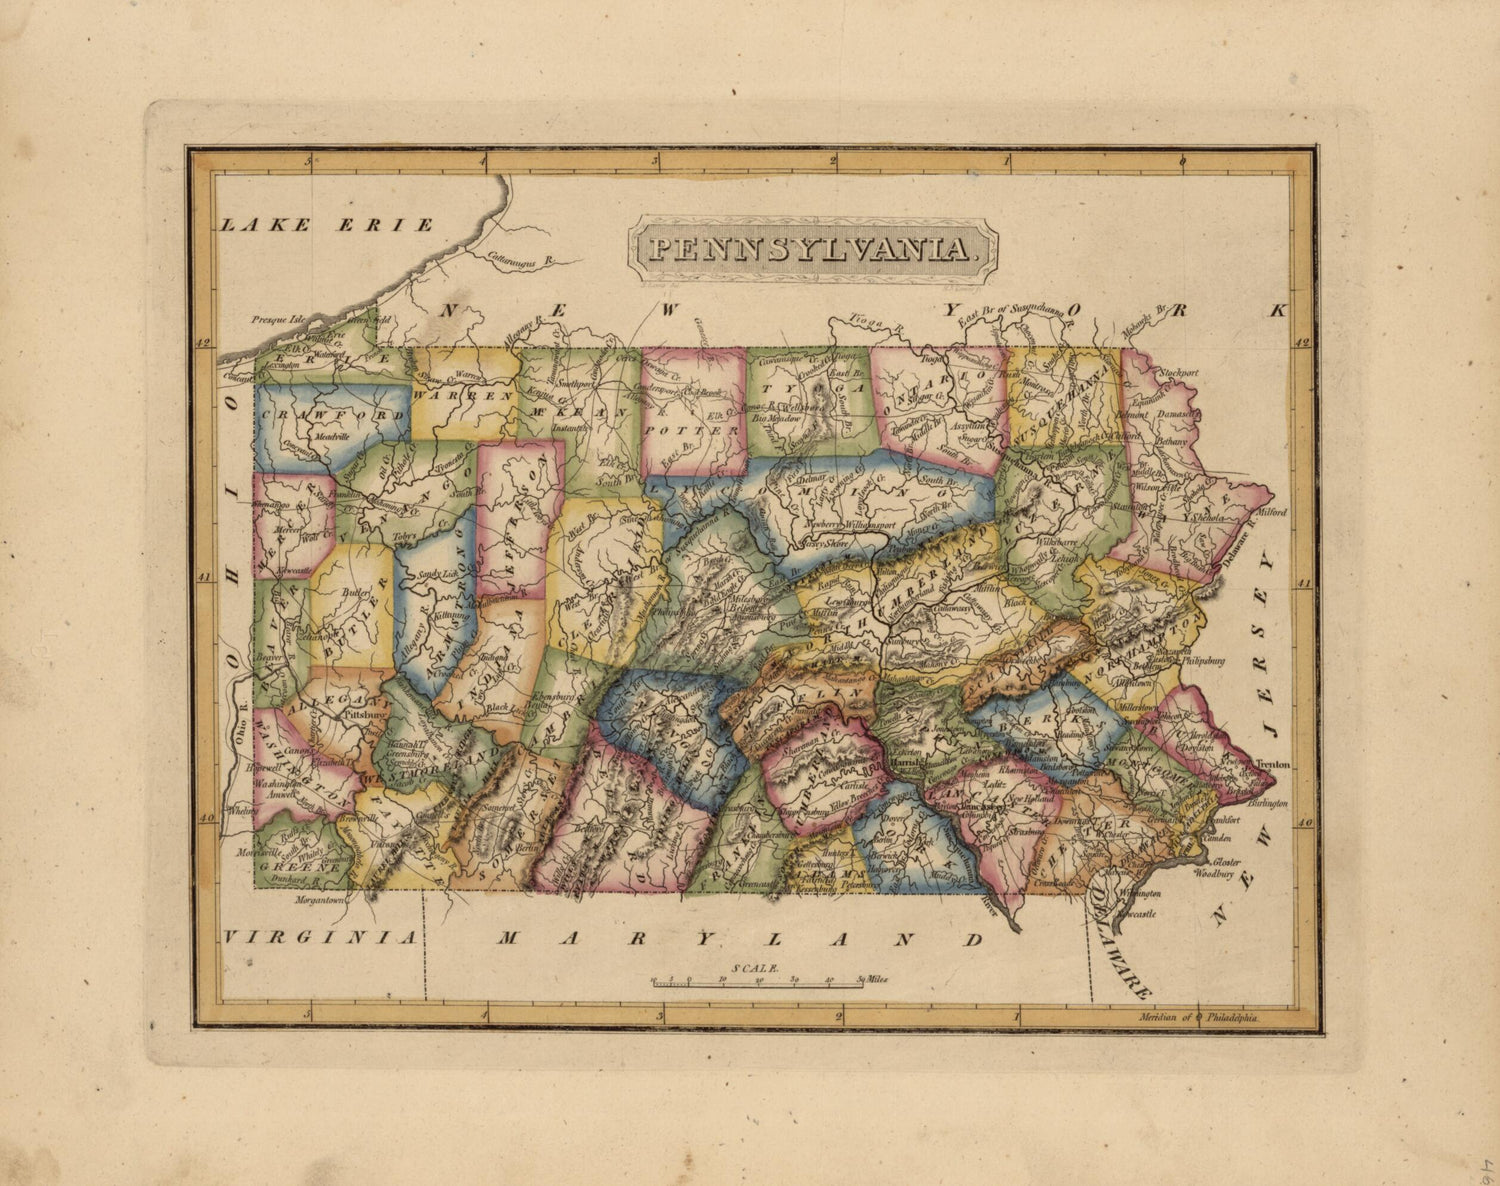 This old map of Pennsylvania from a New and Elegant General Atlas, Containing Maps of Each of the United States. from 1817 was created by Henry Schenck Tanner in 1817